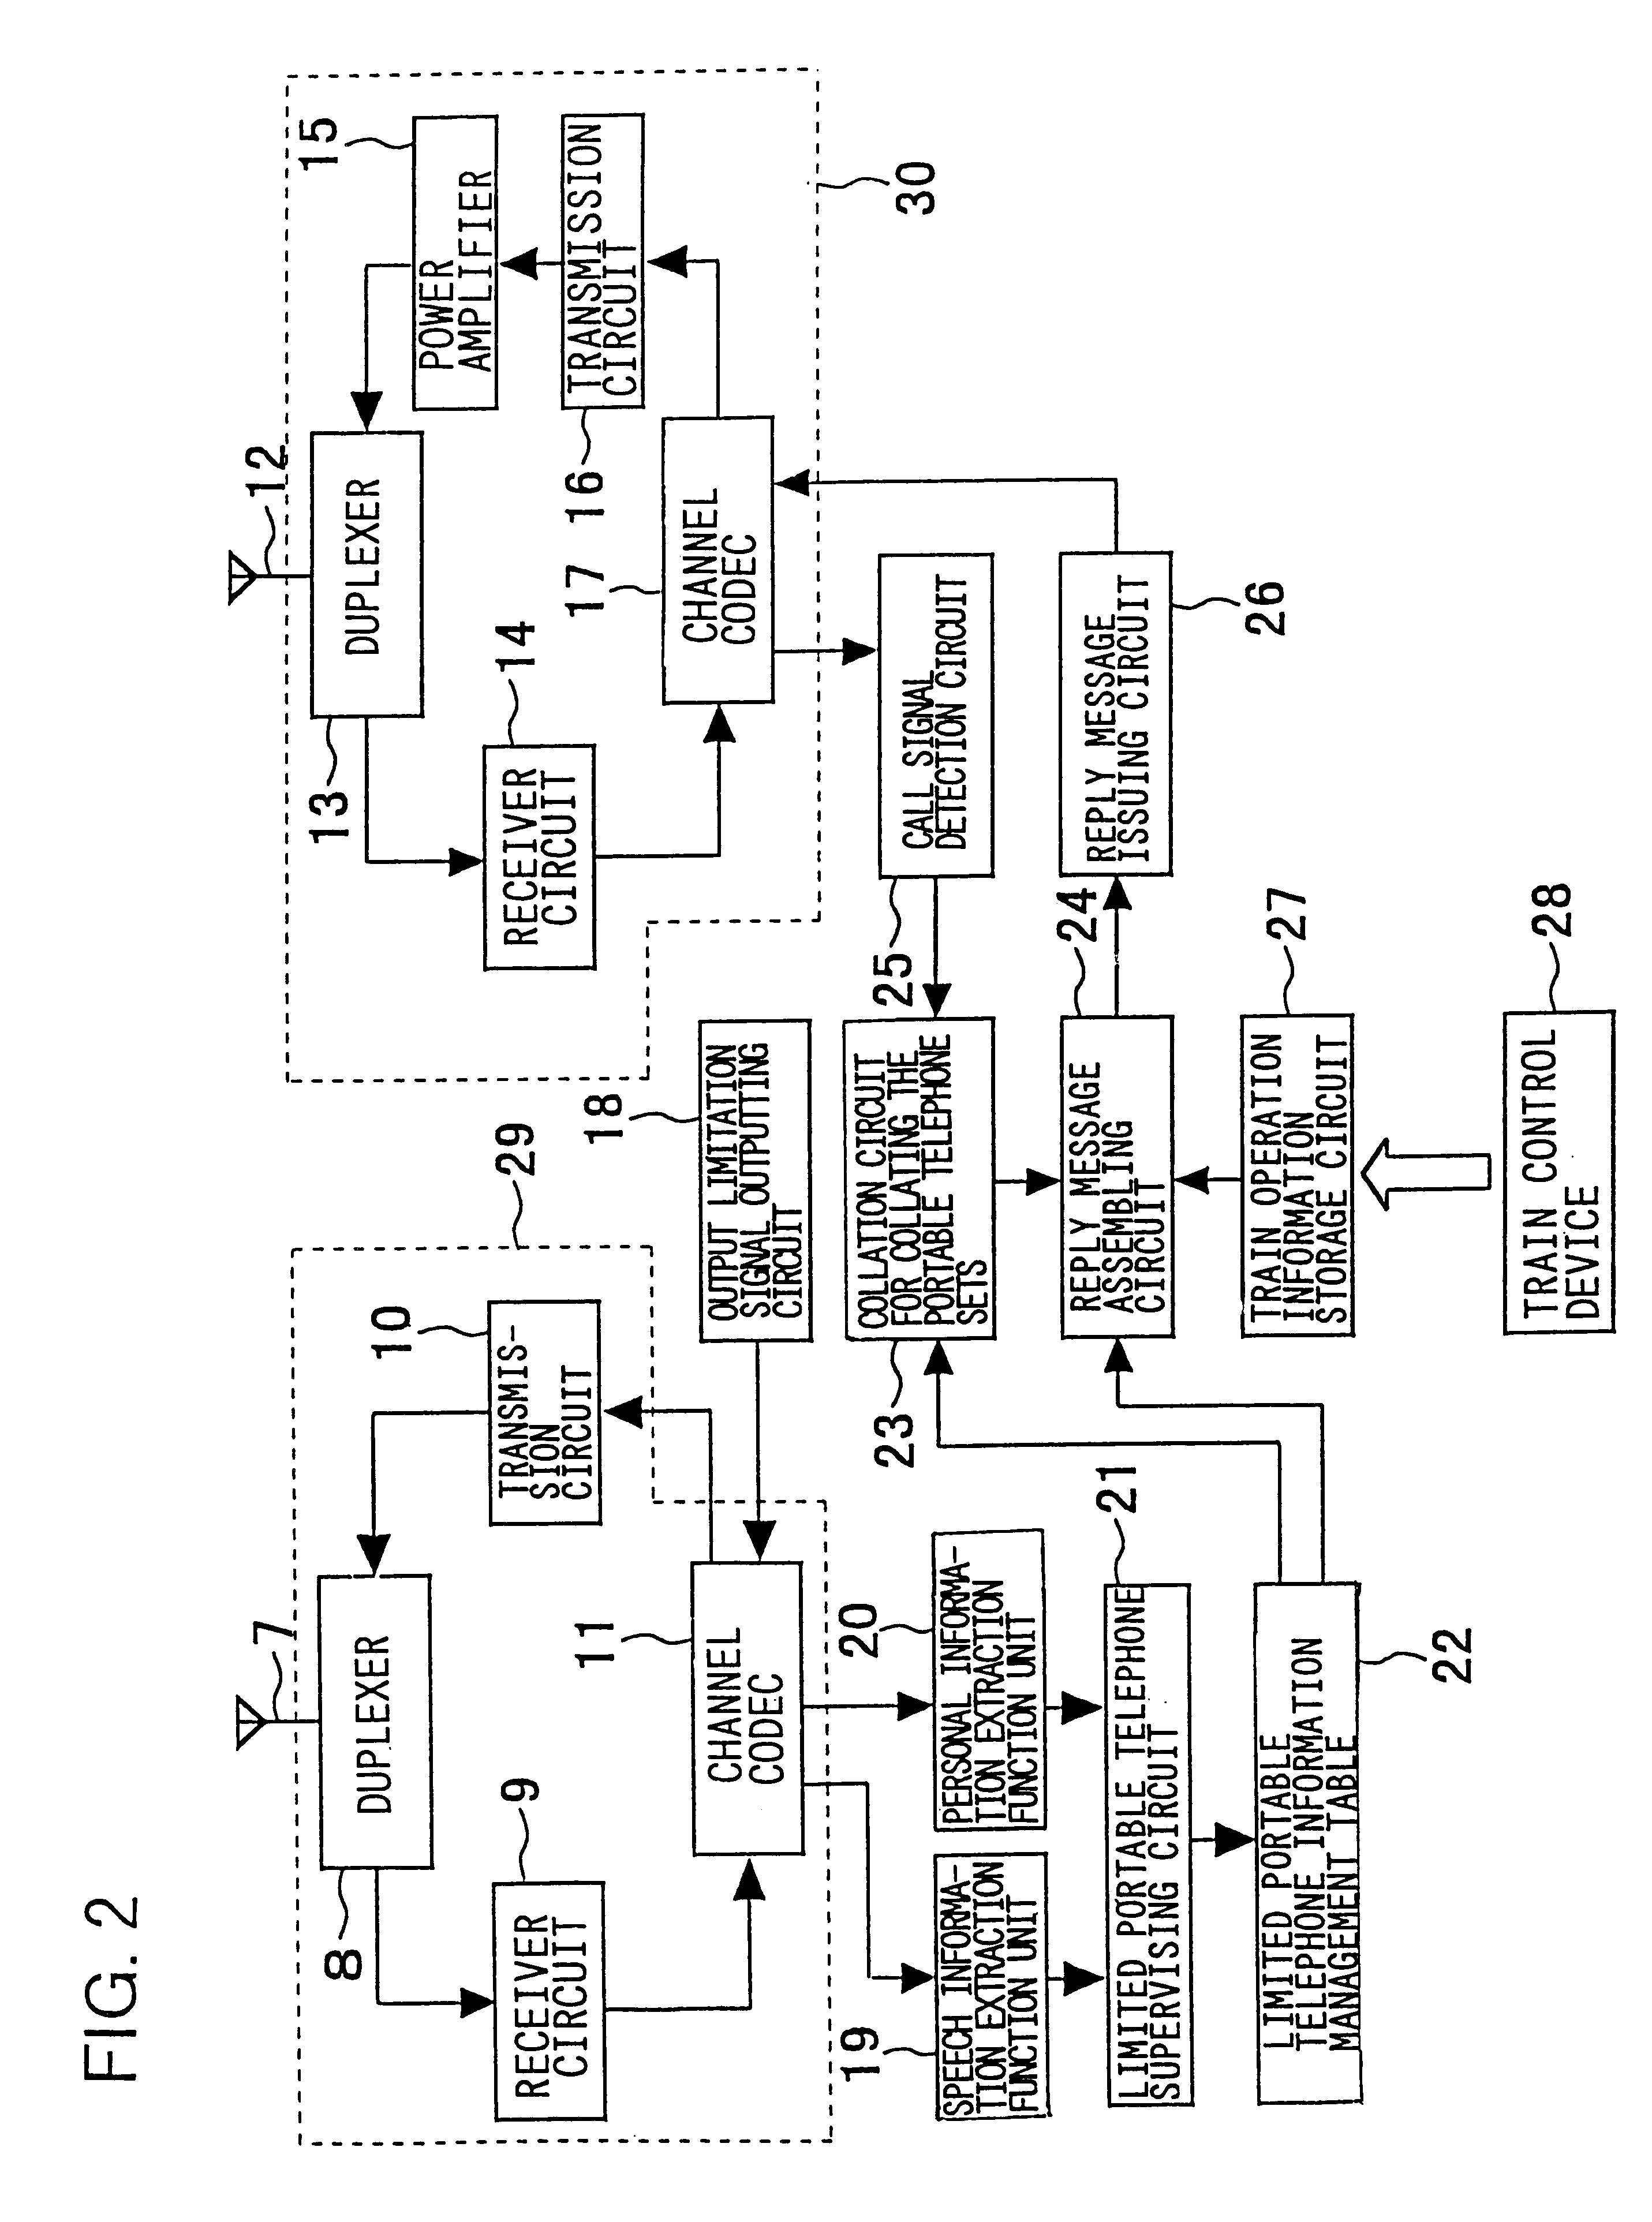 Automatic radio wave output limiting system for portable telephone set